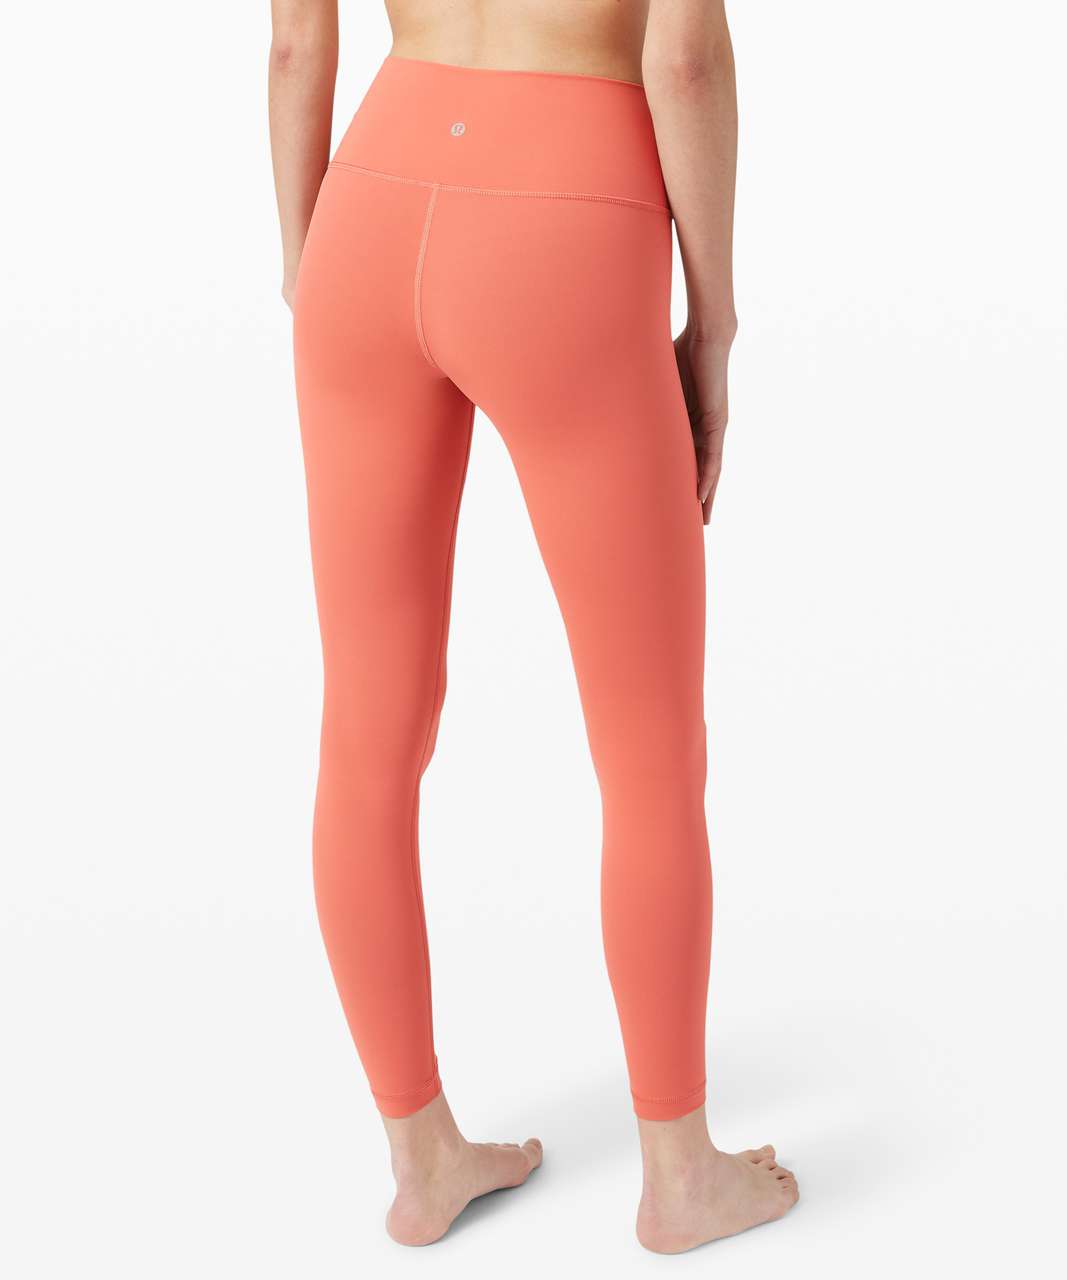 Lululemon Wunder Under High-Rise Tight 28" *Full-On Luxtreme - Rustic Coral